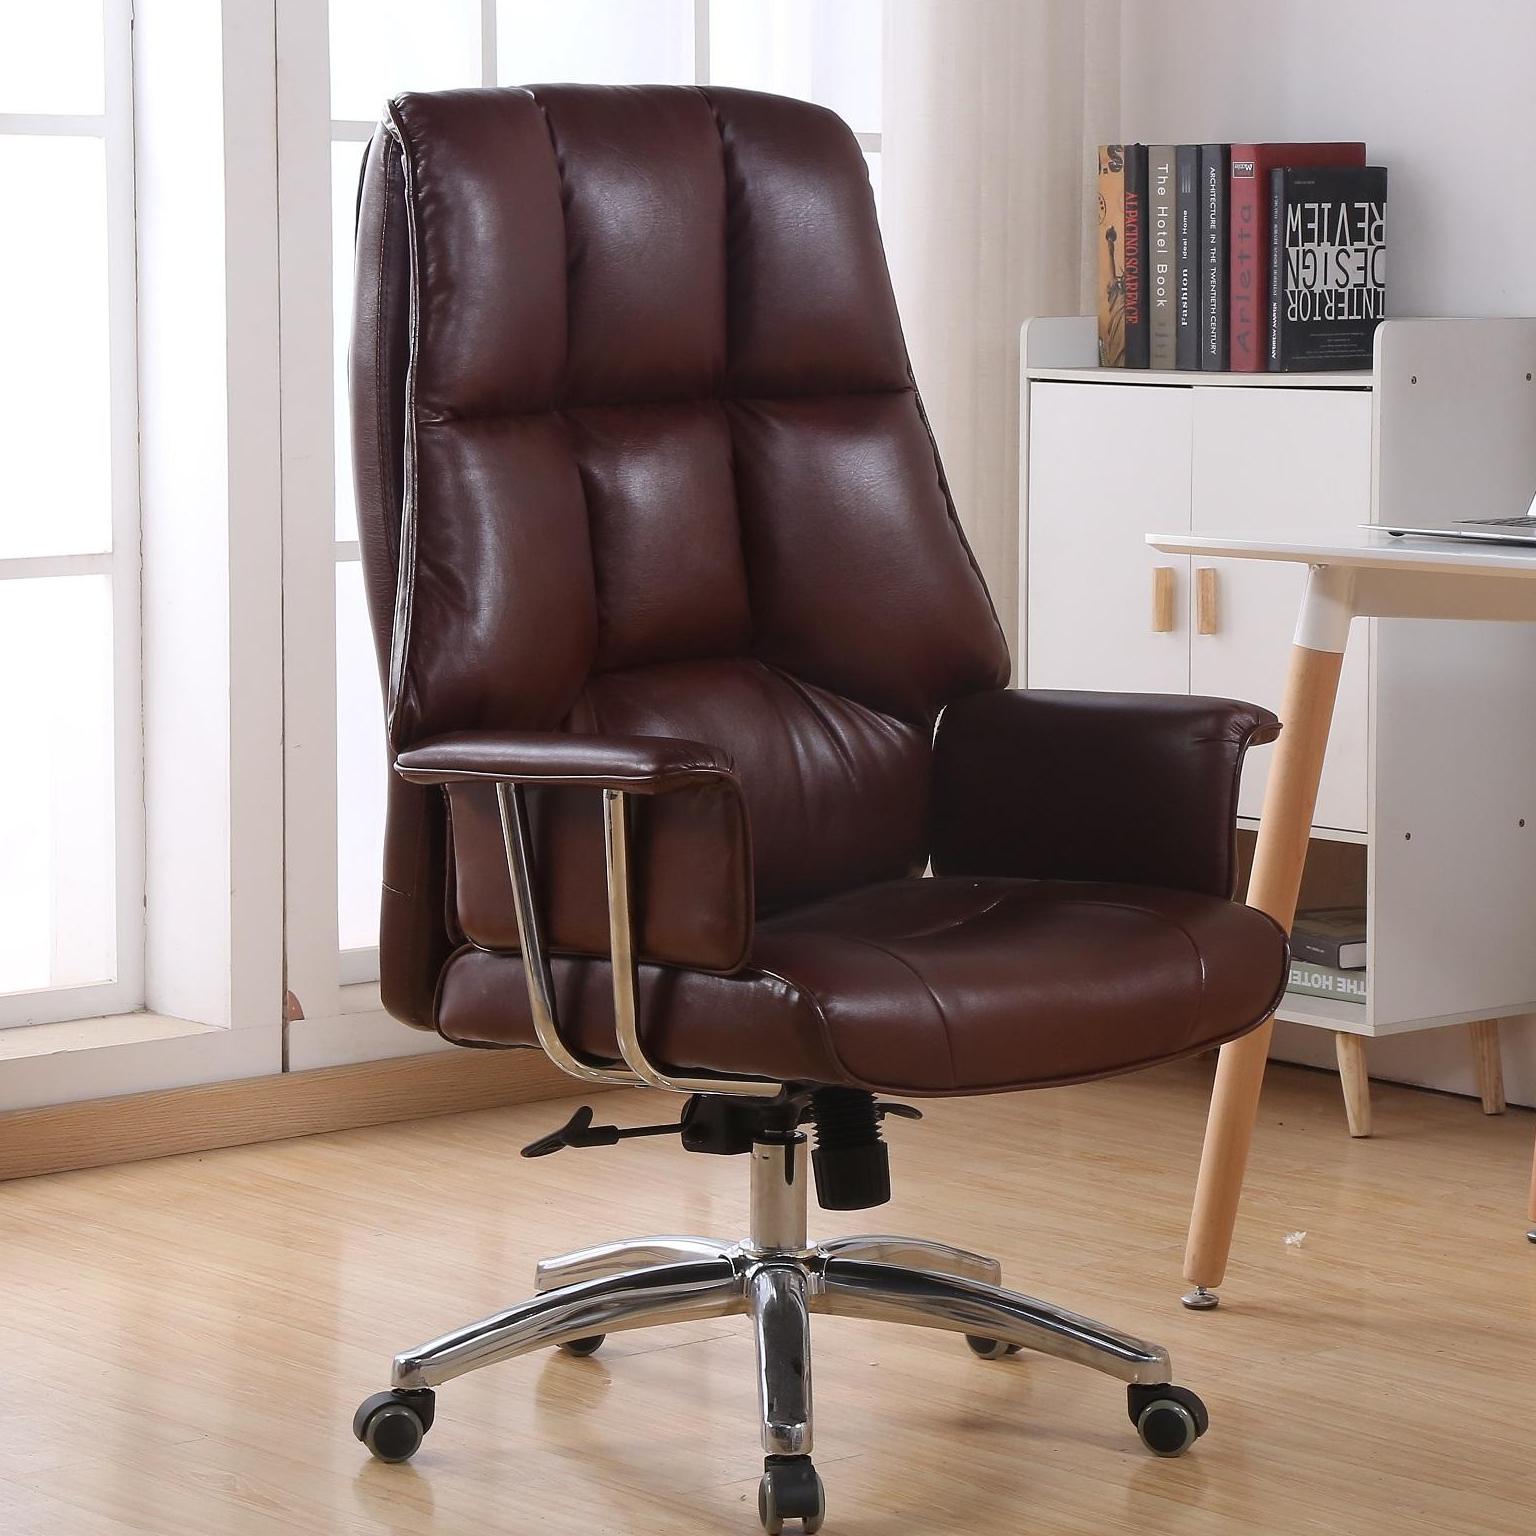 heavy duty  high back recline boss chair  bc03  specially for big size  user singapore